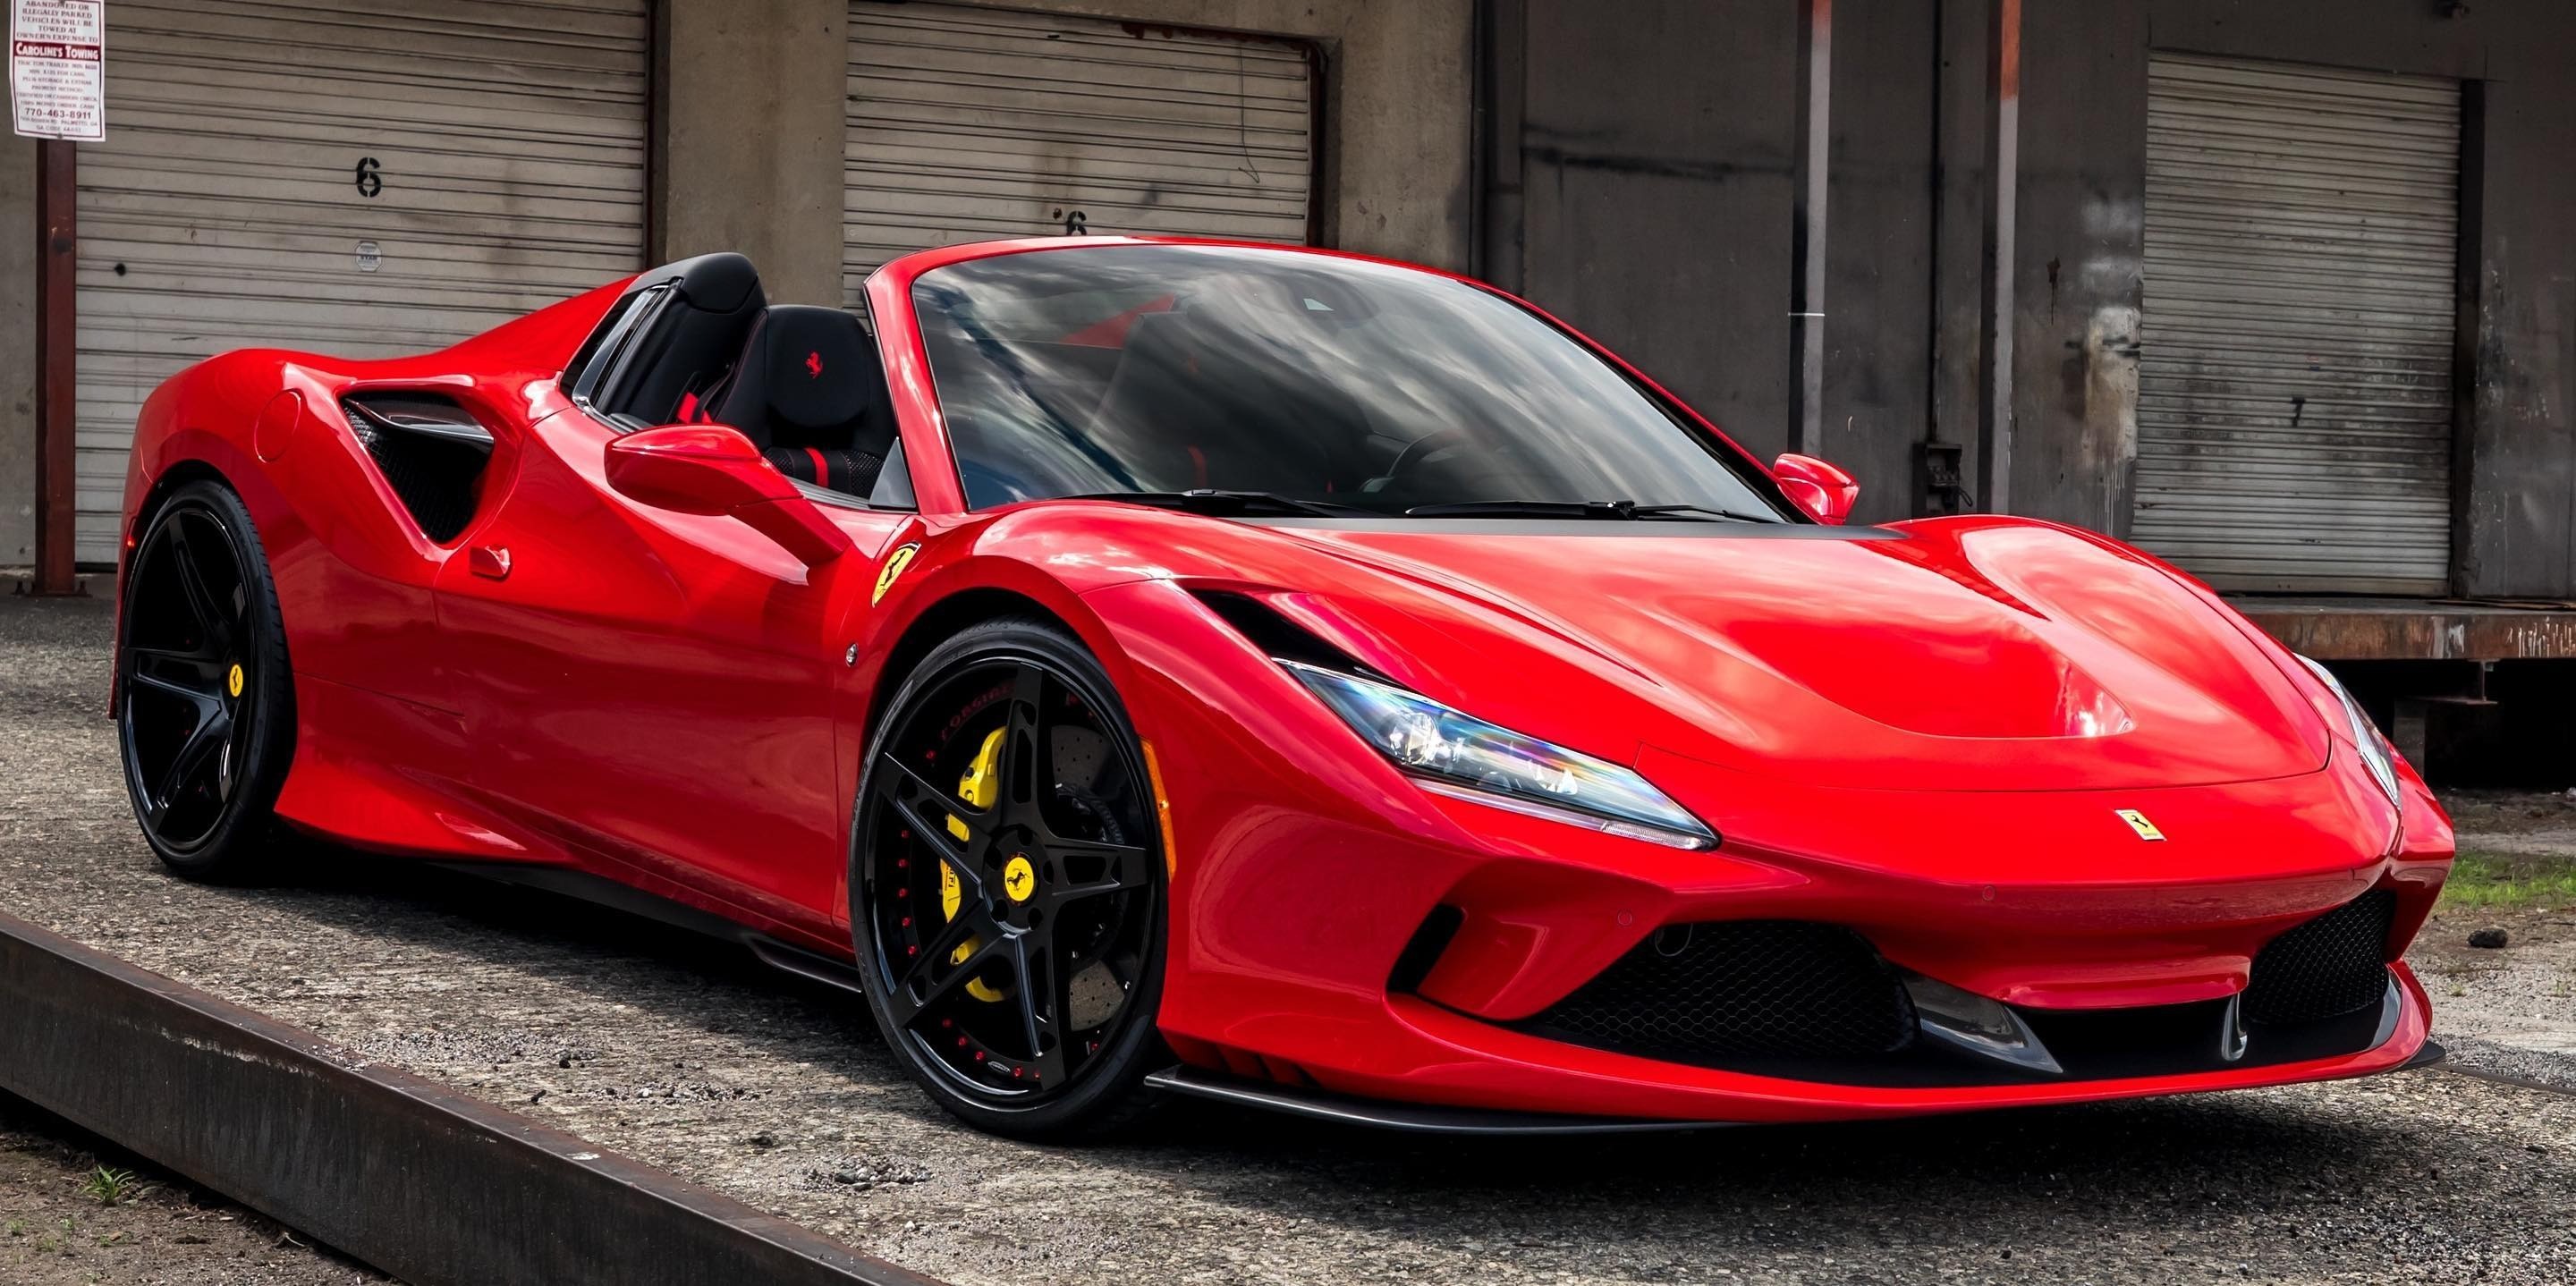 Ferrari F8 Spider RS Edition Flaunts Eager Contrasting Looks Worthy of